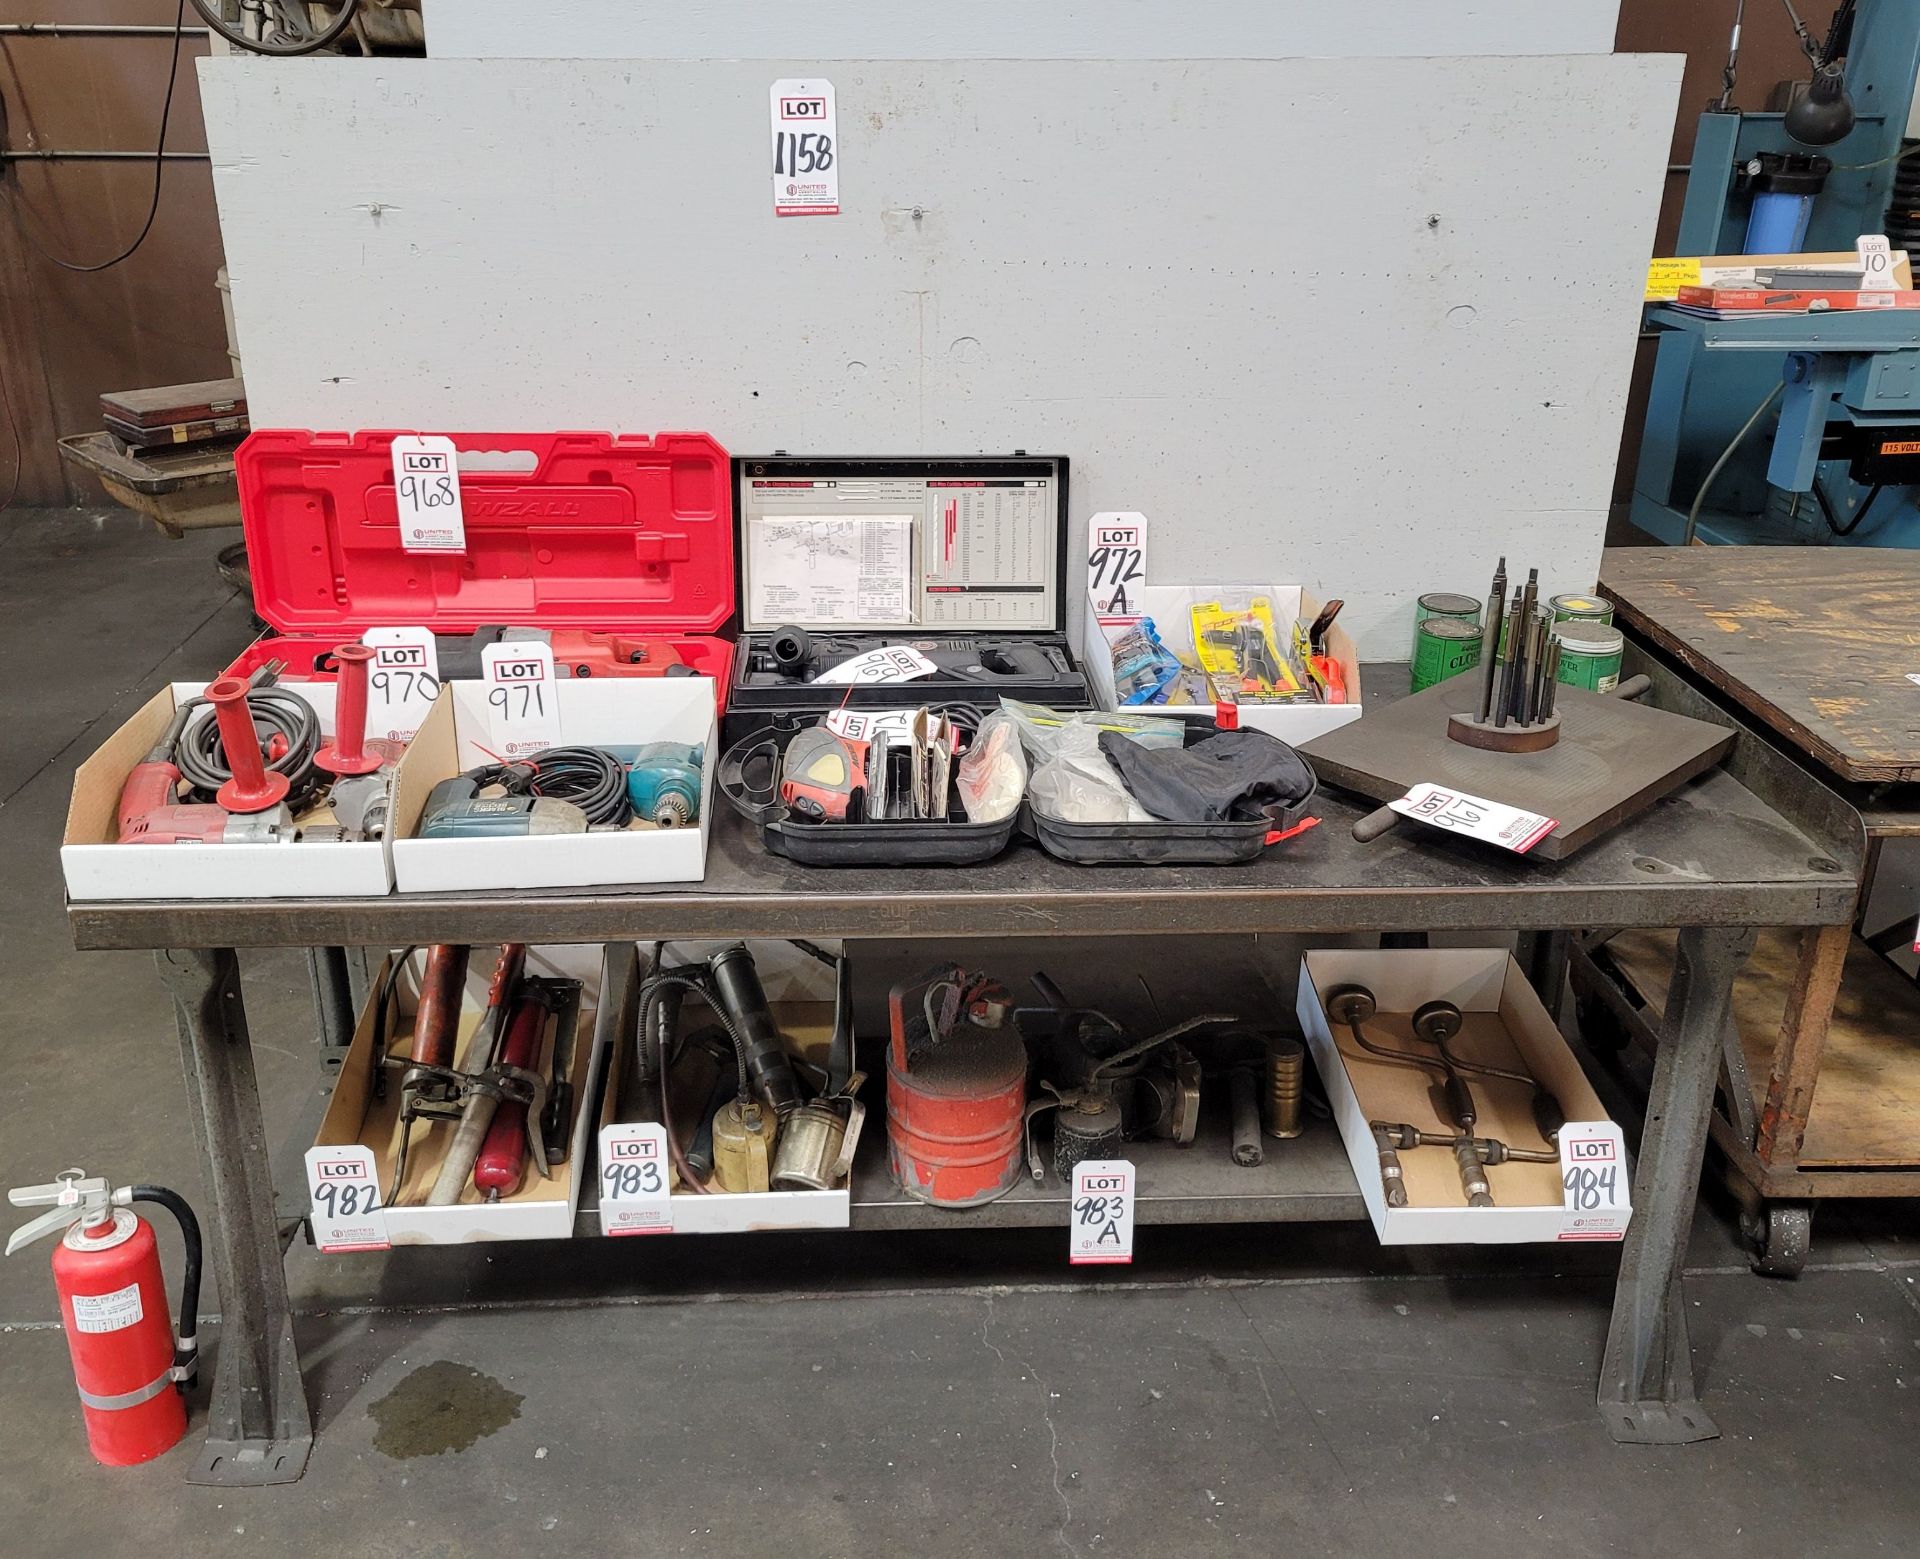 6' WORKBENCH, CONTENTS NOT INCLUDED, (DELAYED PICKUP UNTIL AUGUST 10)